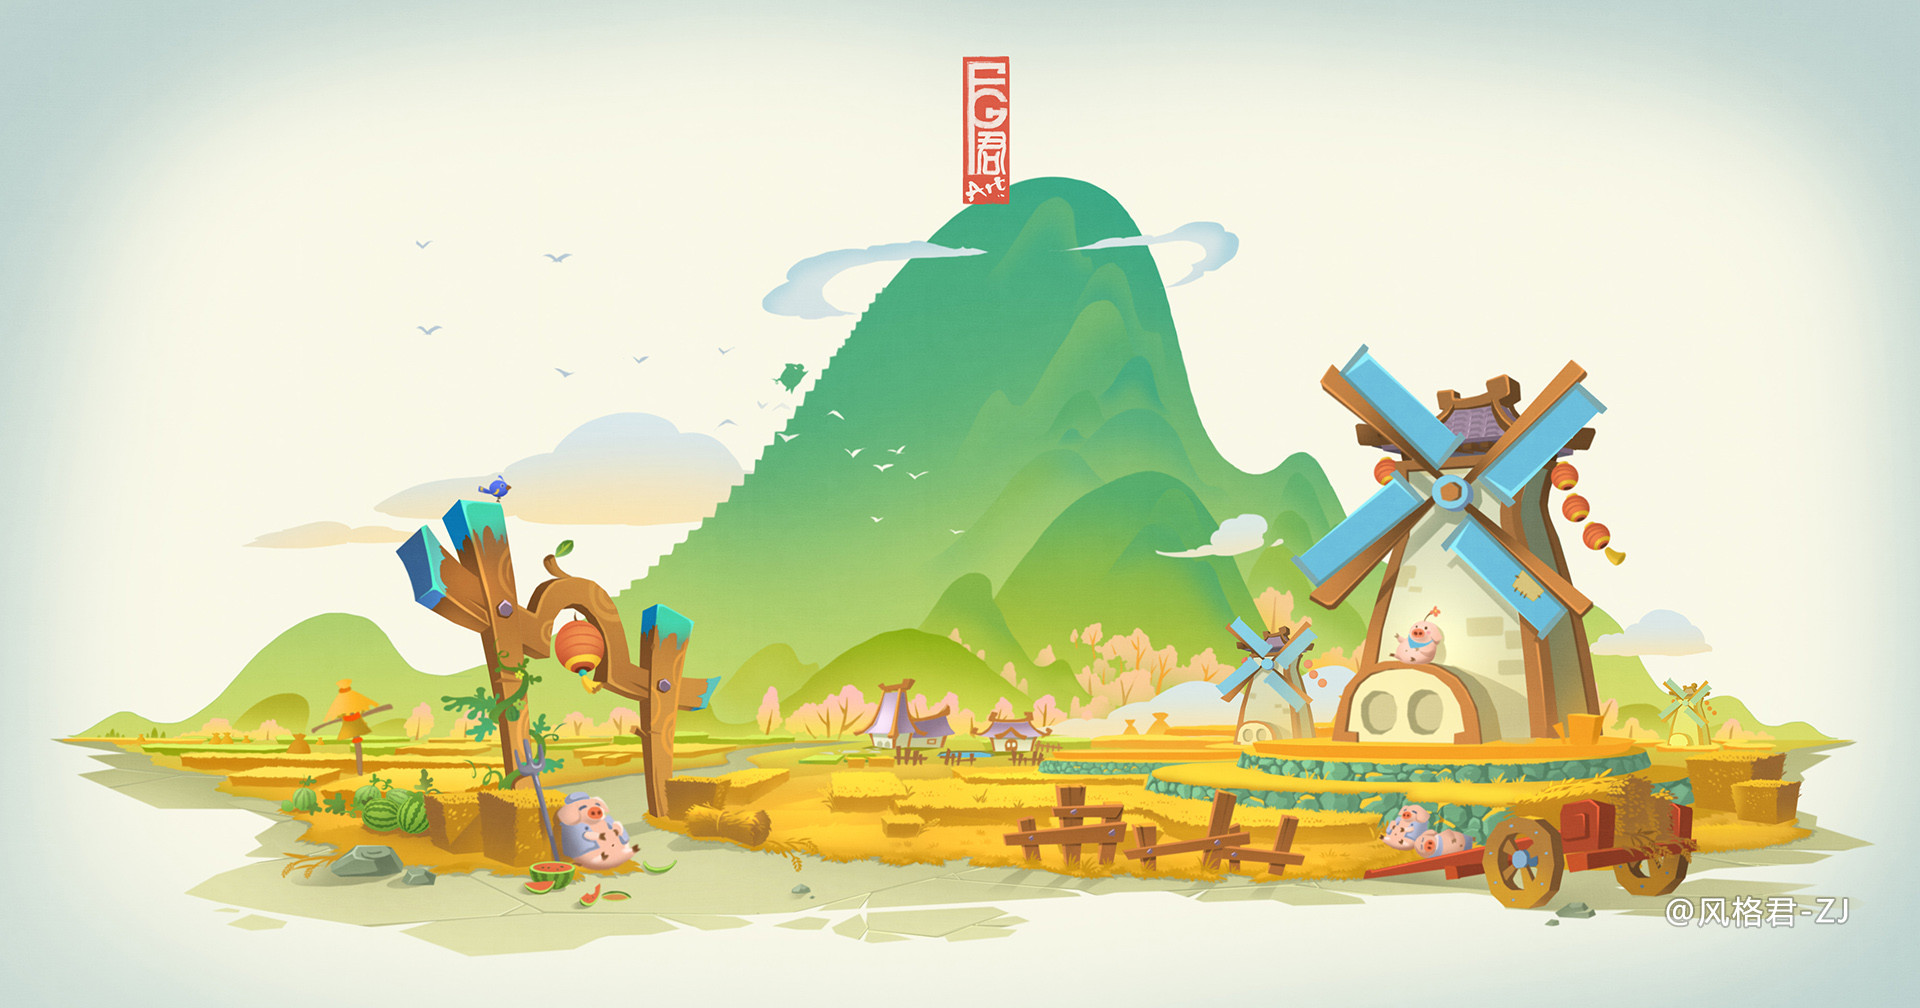 General 1920x1008 Jun Zhang Asian architecture white background pigs digital art windmill farm scarecrows mountains